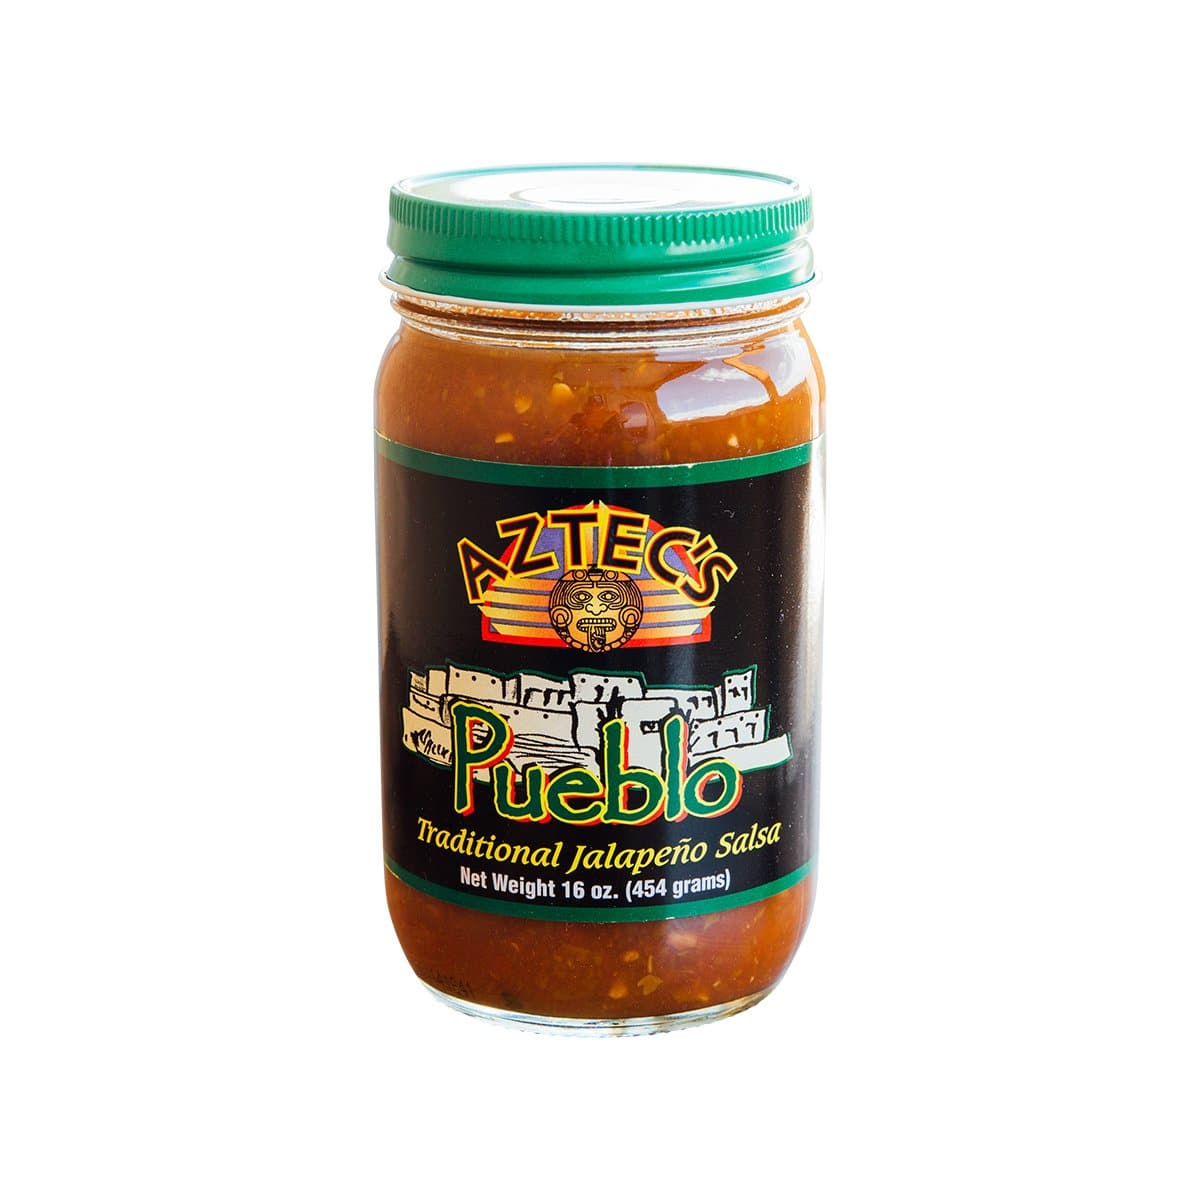 A jar of Aztec Pueblo Salsa against a white background, showing clear packaging and the label with a colorful design and text.